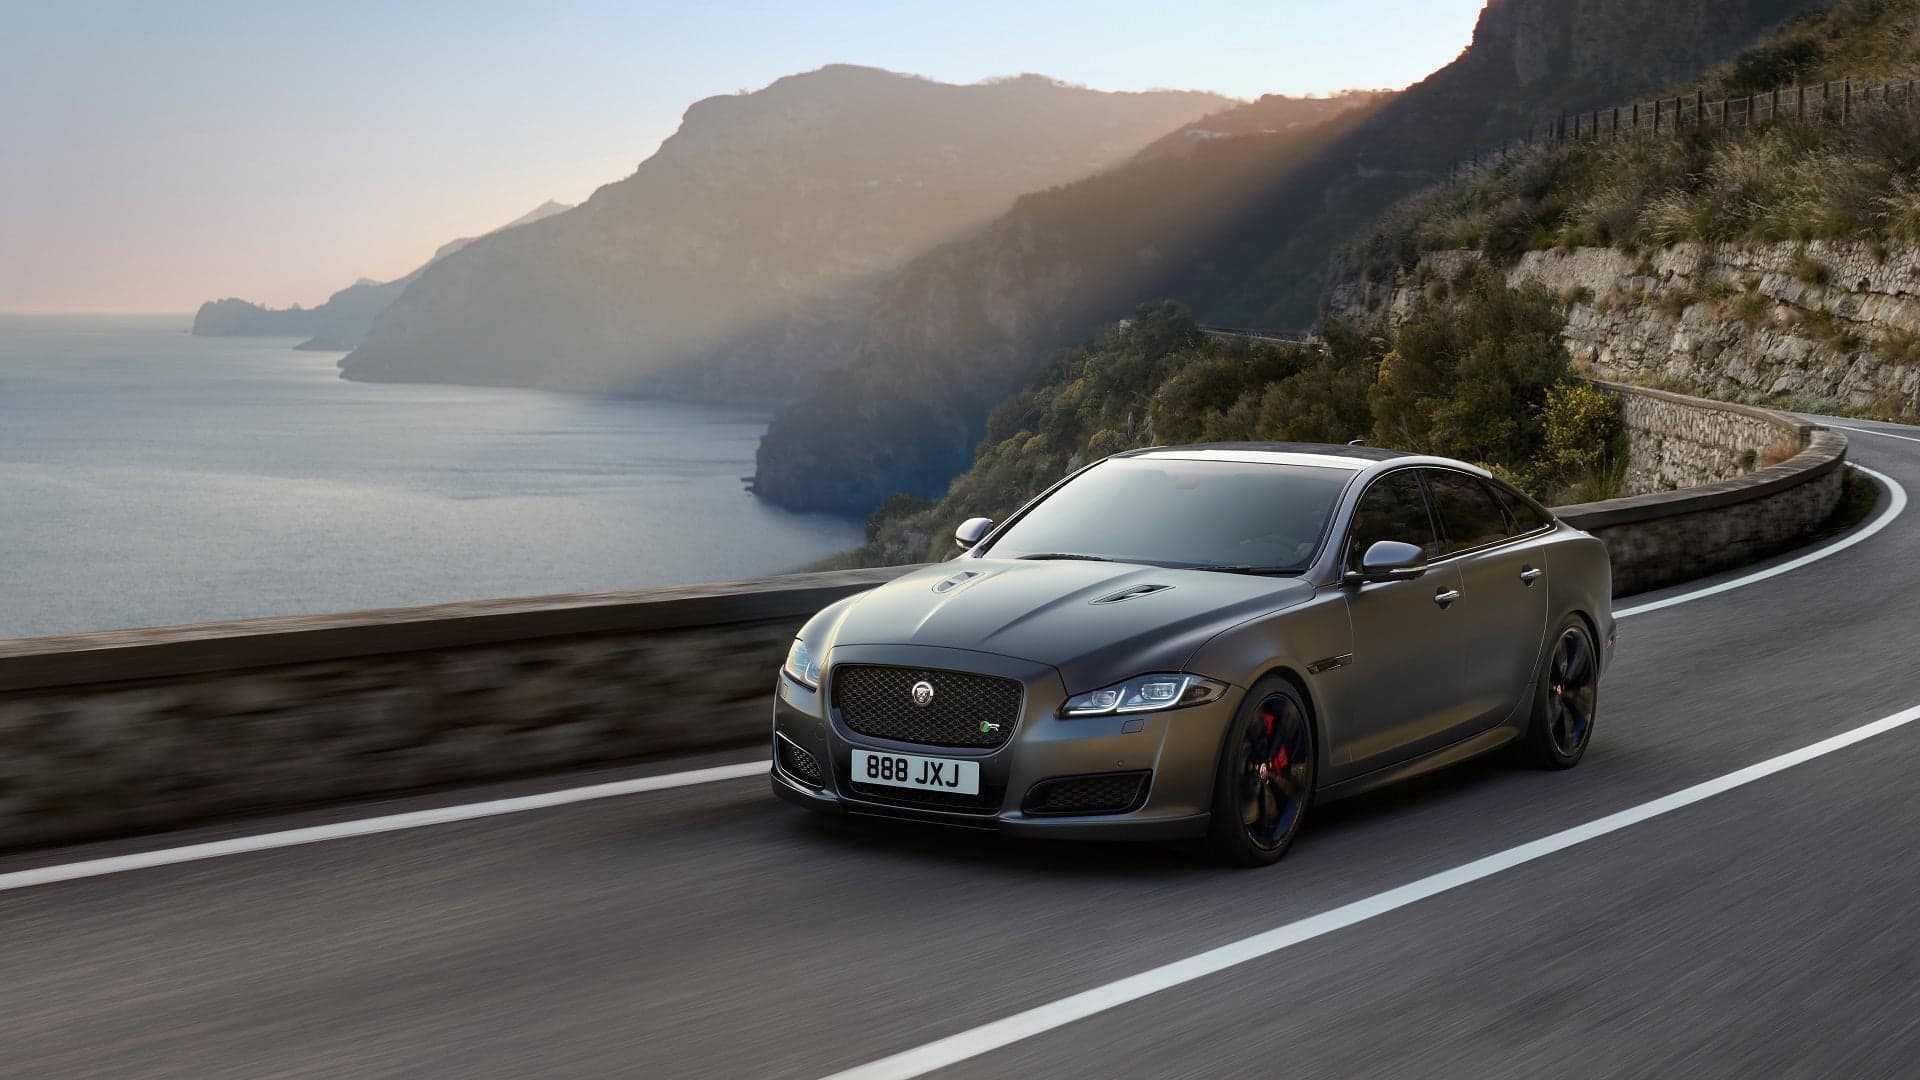 575-HP Jaguar XJR575 Debuts With an Interview at 186-MPH